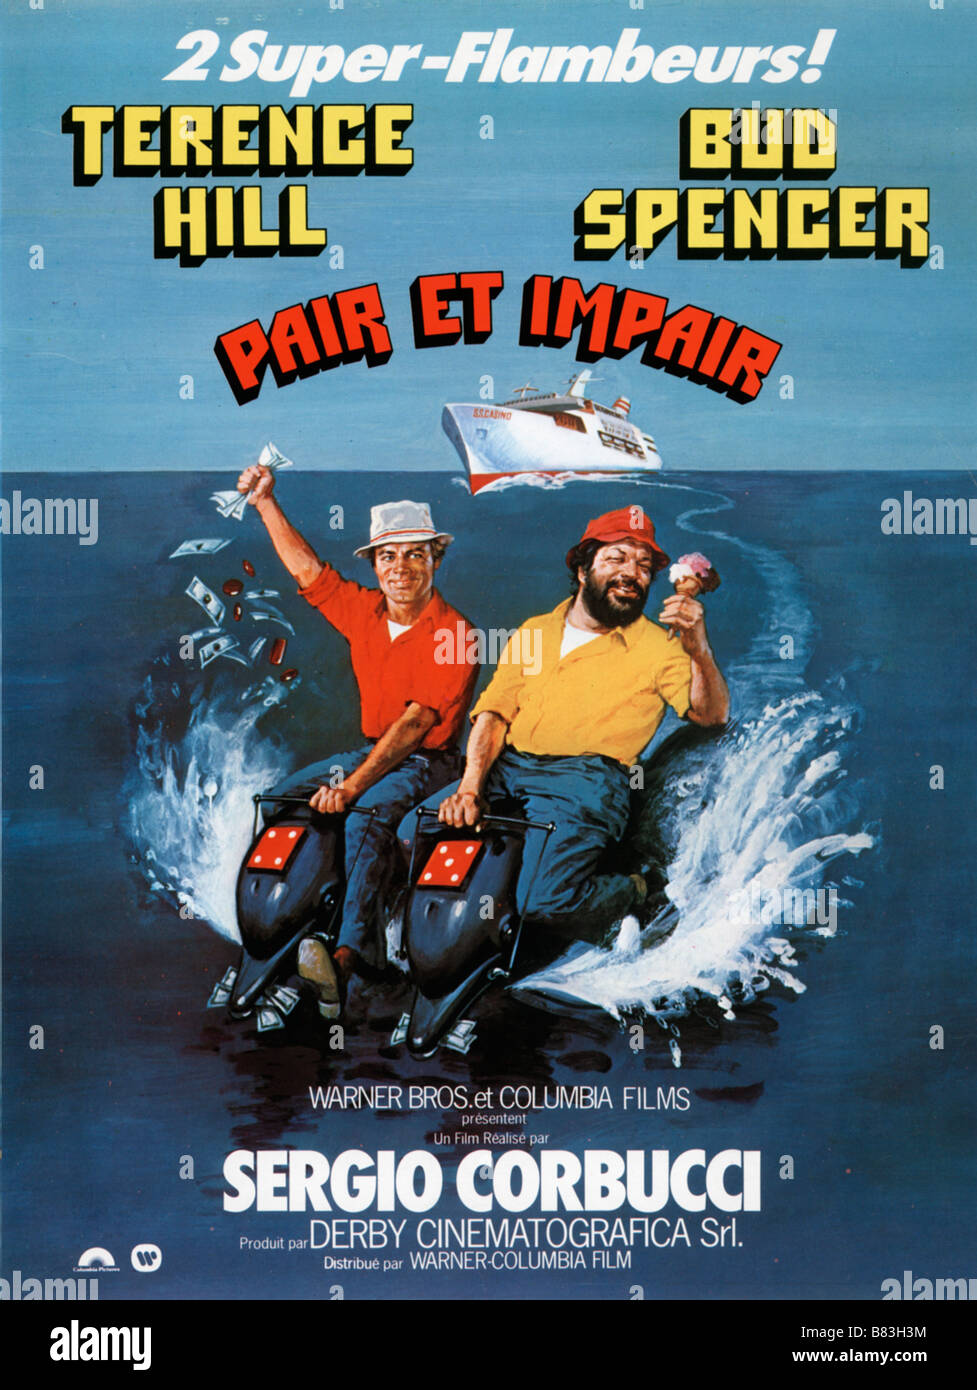 Terence hill bud spencer poster hi-res stock photography and images - Alamy